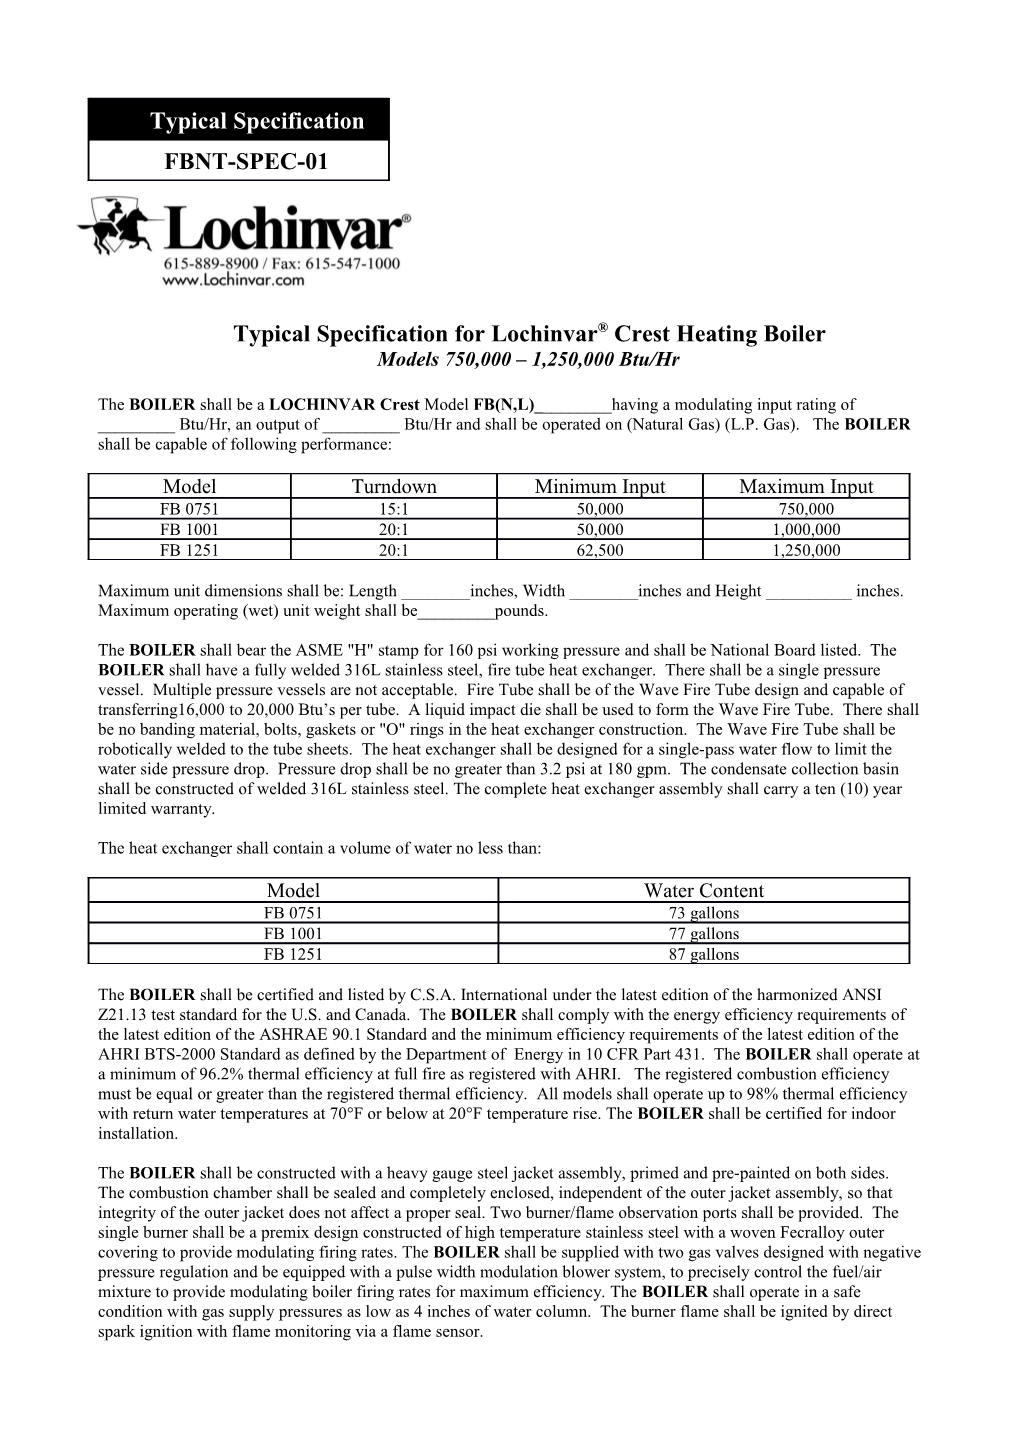 Typical Specification for Lochinvar Crest Heating Boiler